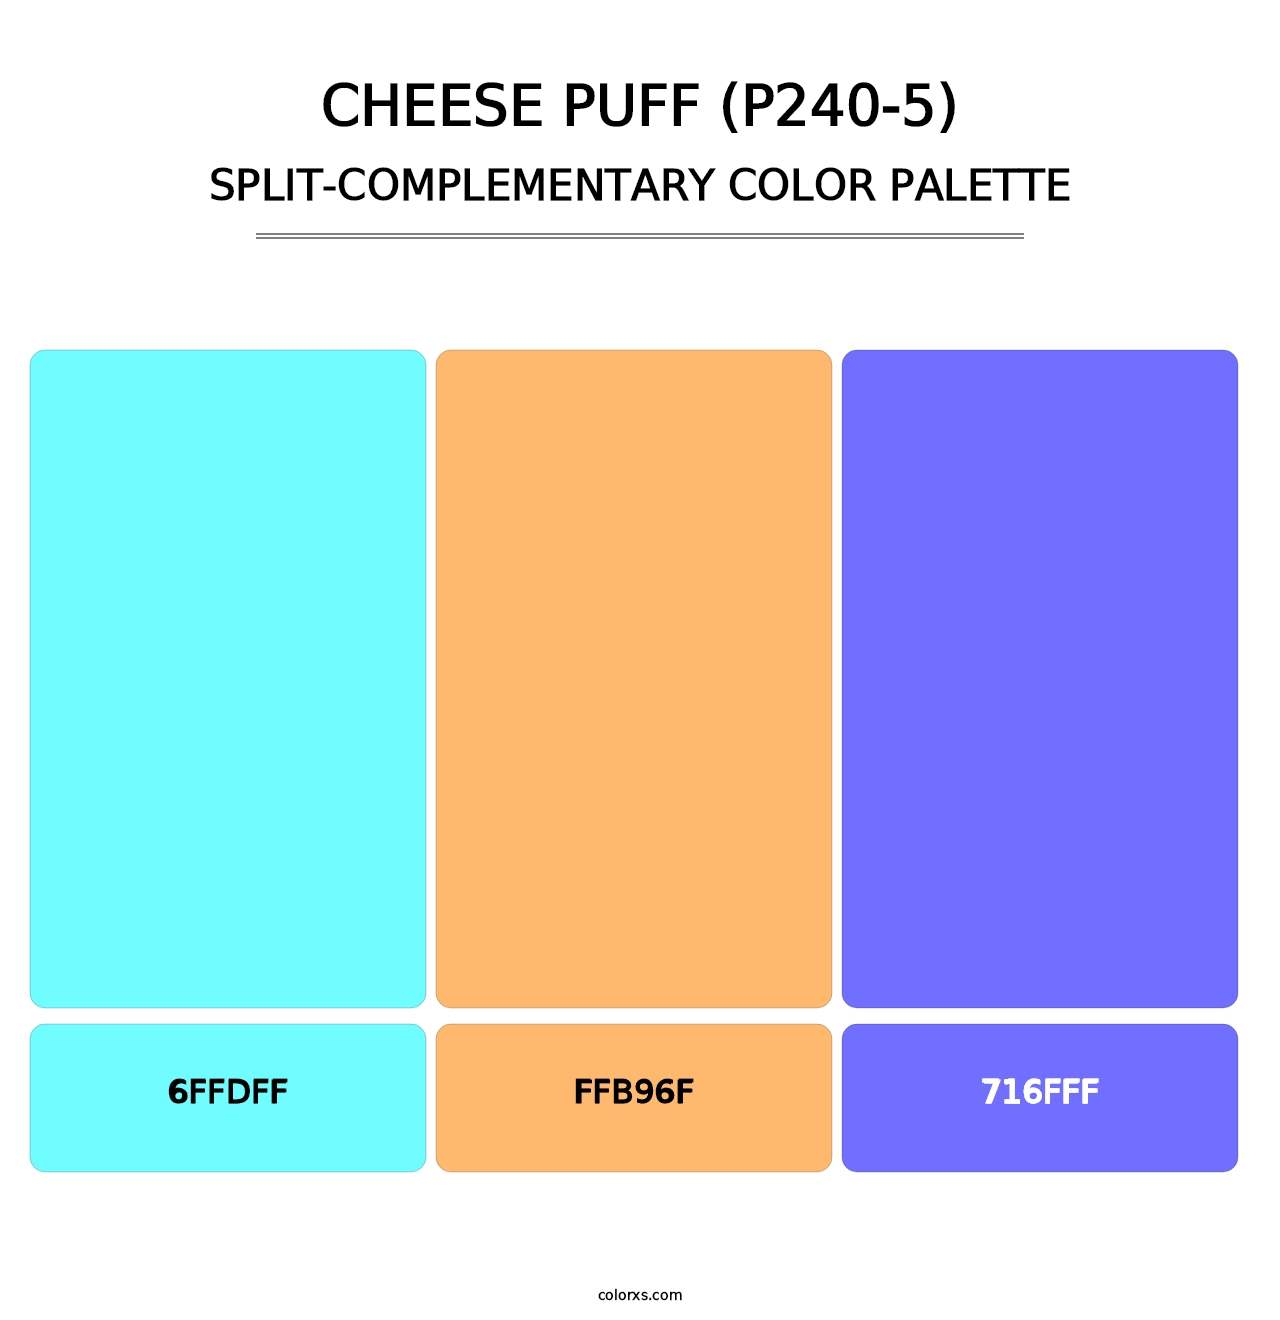 Cheese Puff (P240-5) - Split-Complementary Color Palette